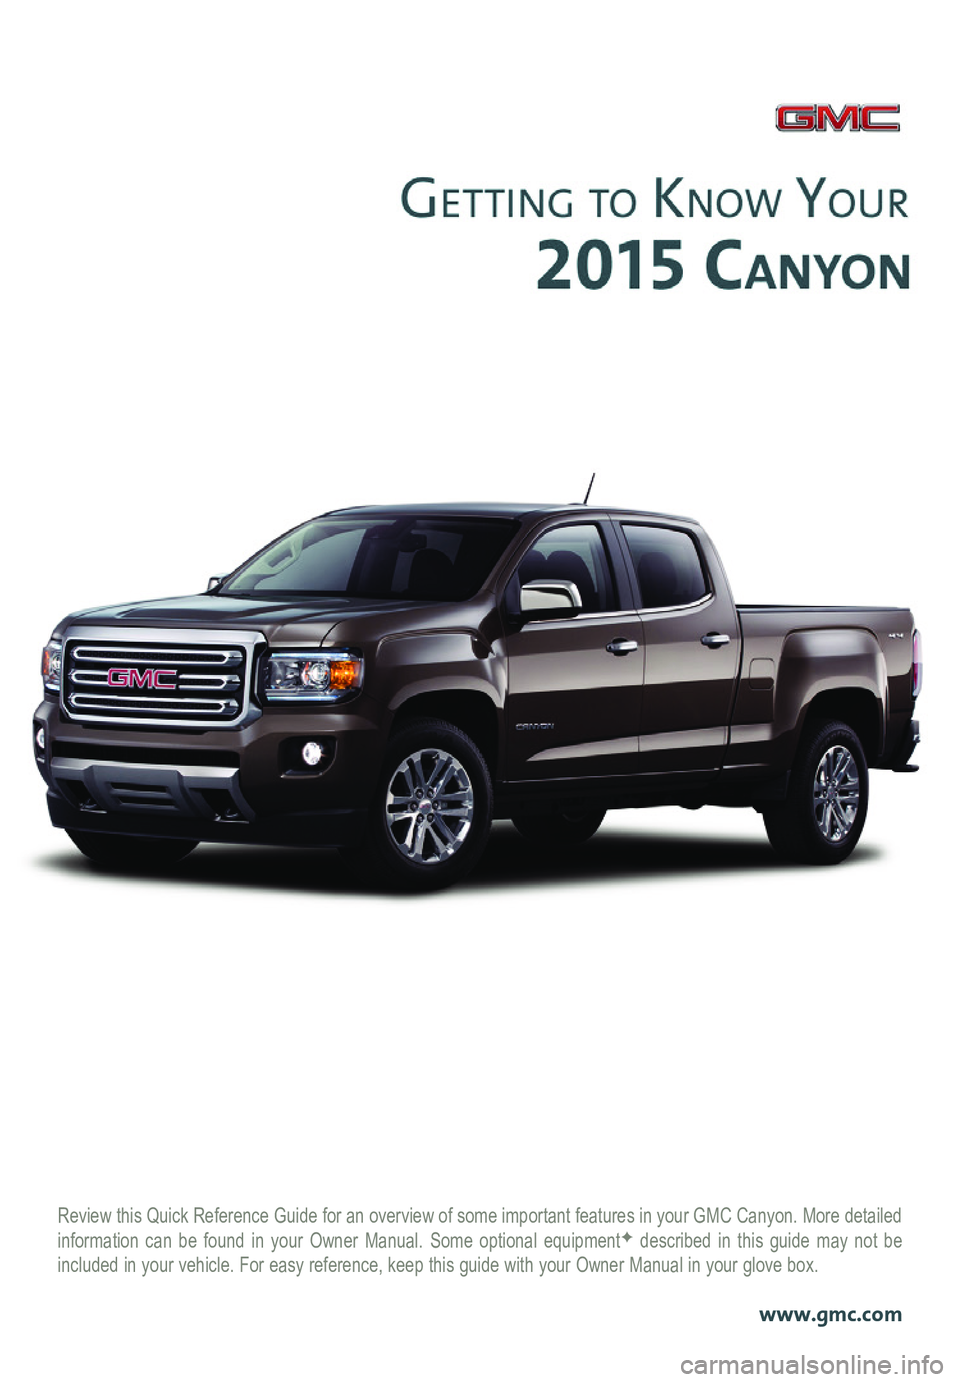 GMC CANYON 2015  Get To Know Guide Review this Quick Reference Guide for an overview of some important feat\
ures in your GMC Canyon. More detailed information can be found in your Owner Manual. Some optional equipmentF described in th